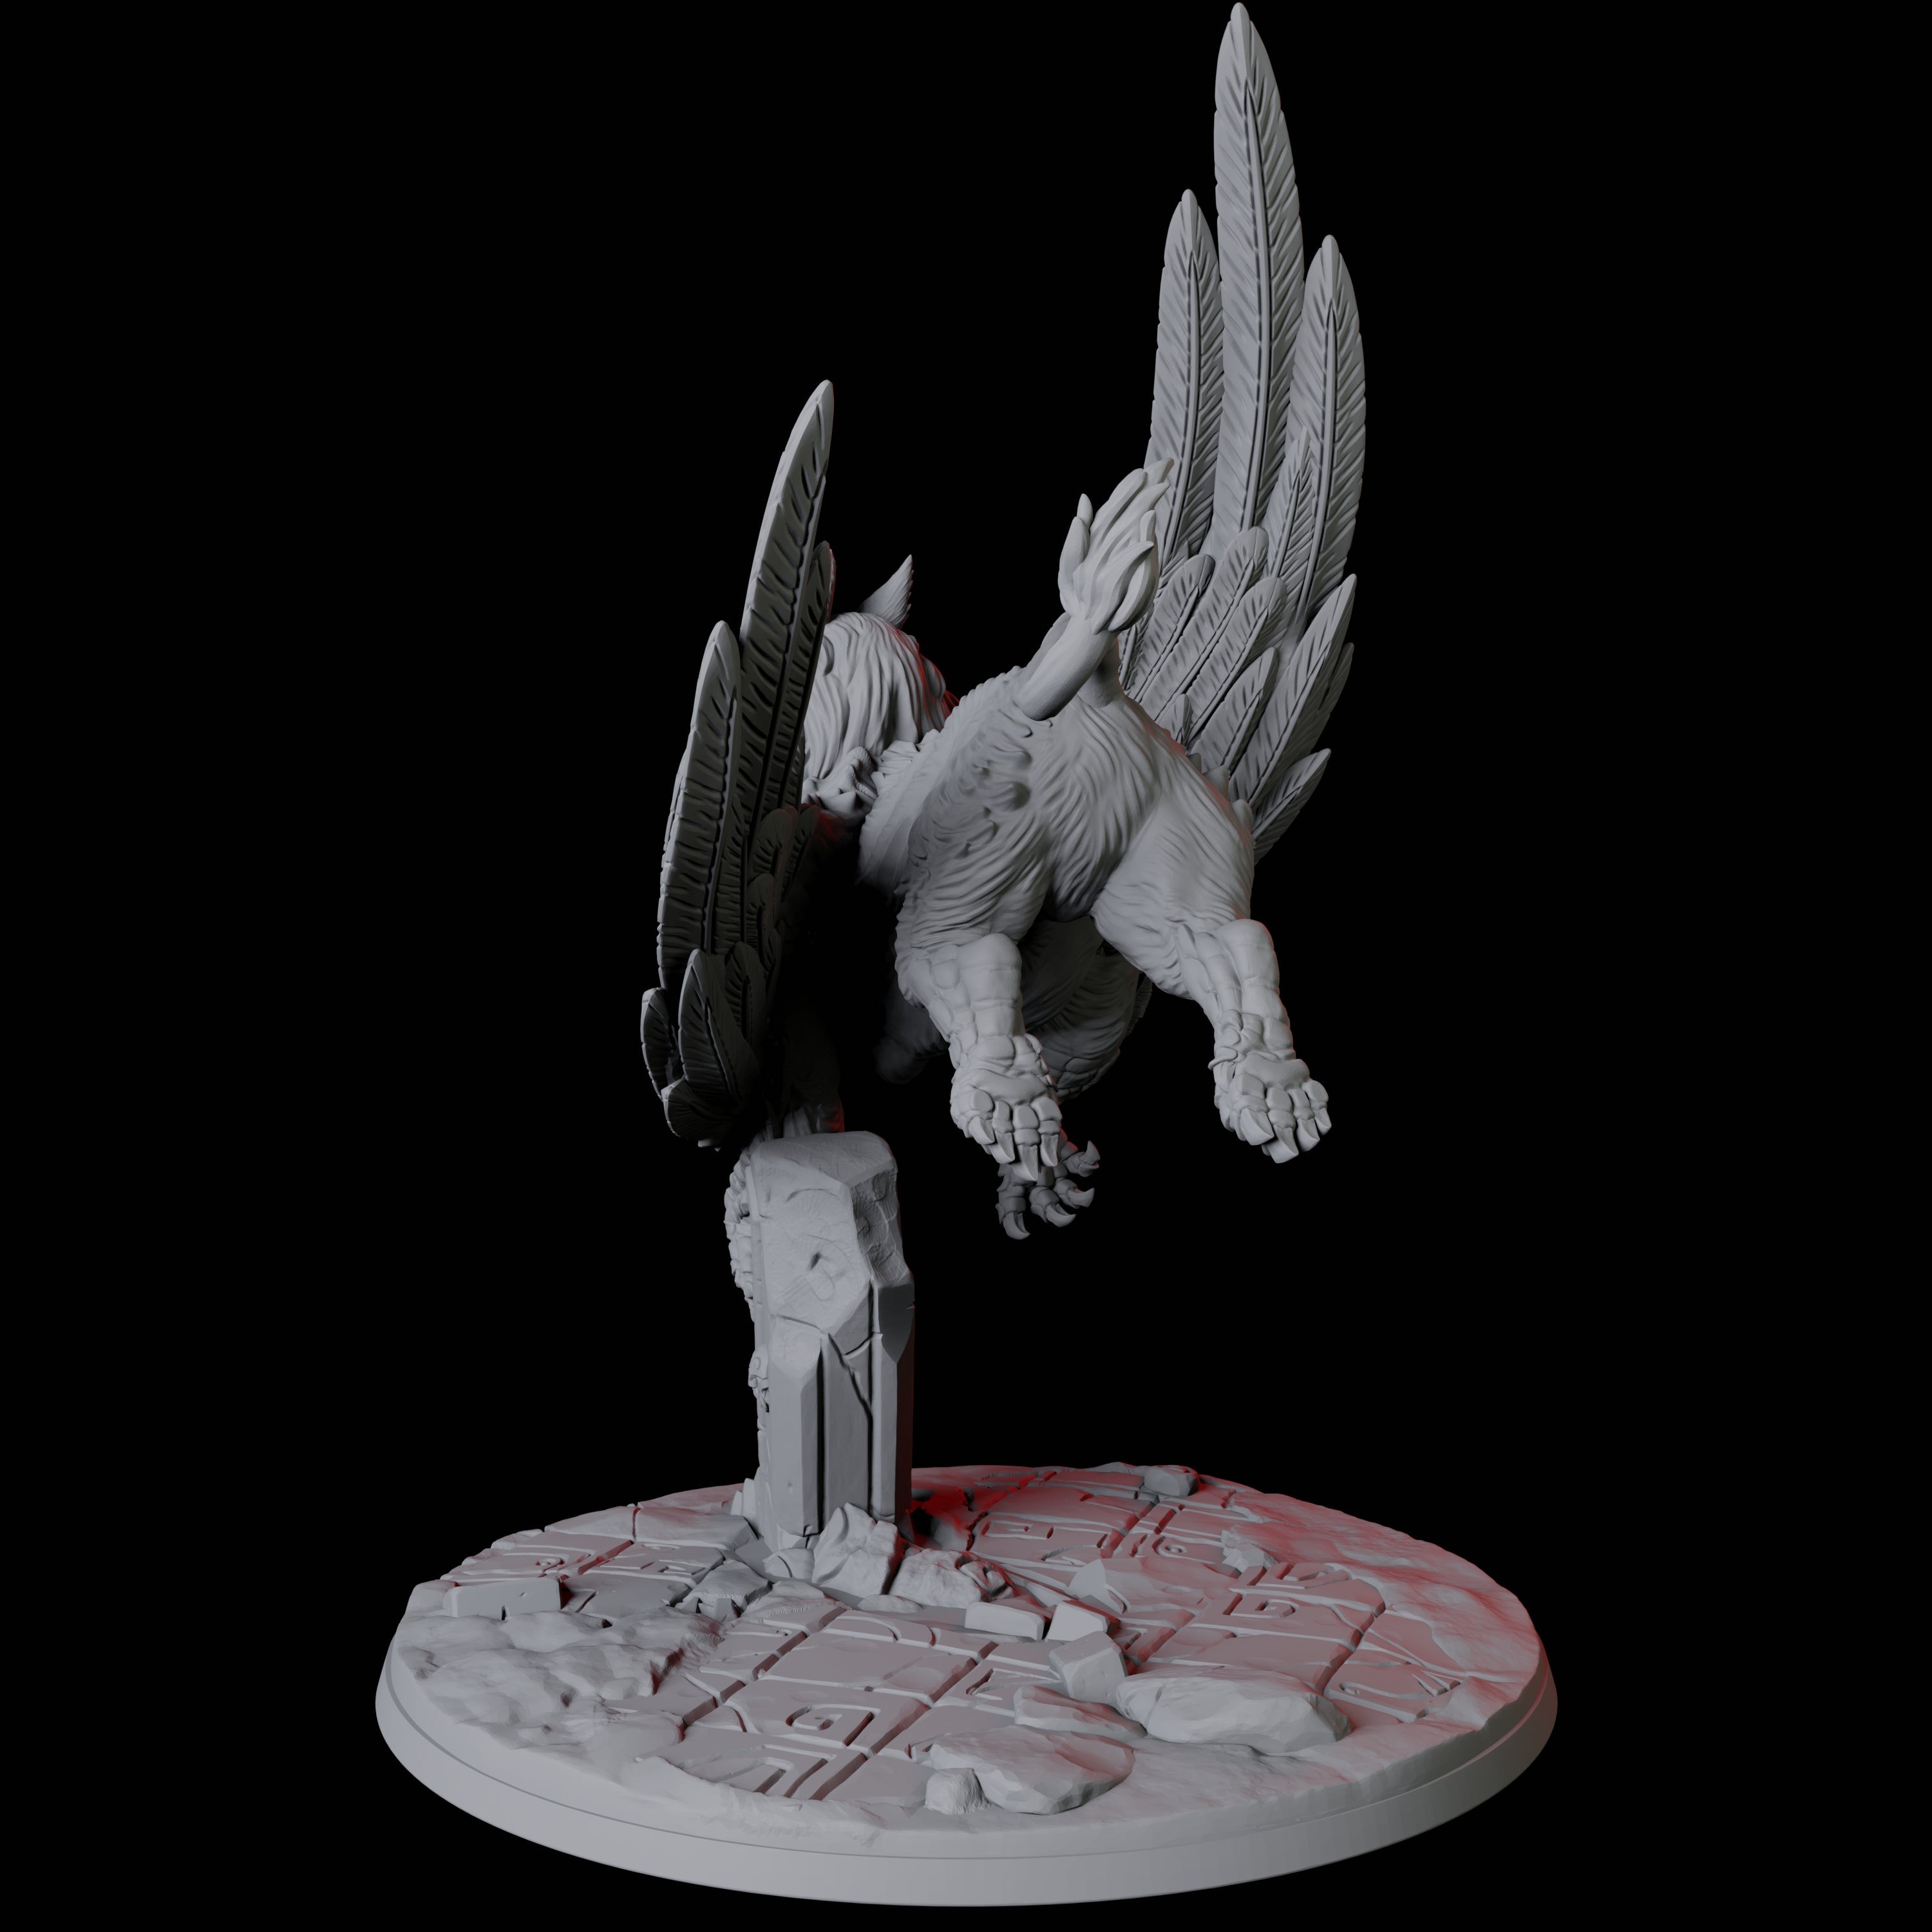 Majestic Griffon Miniature for Dungeons and Dragons, Pathfinder or other TTRPGs